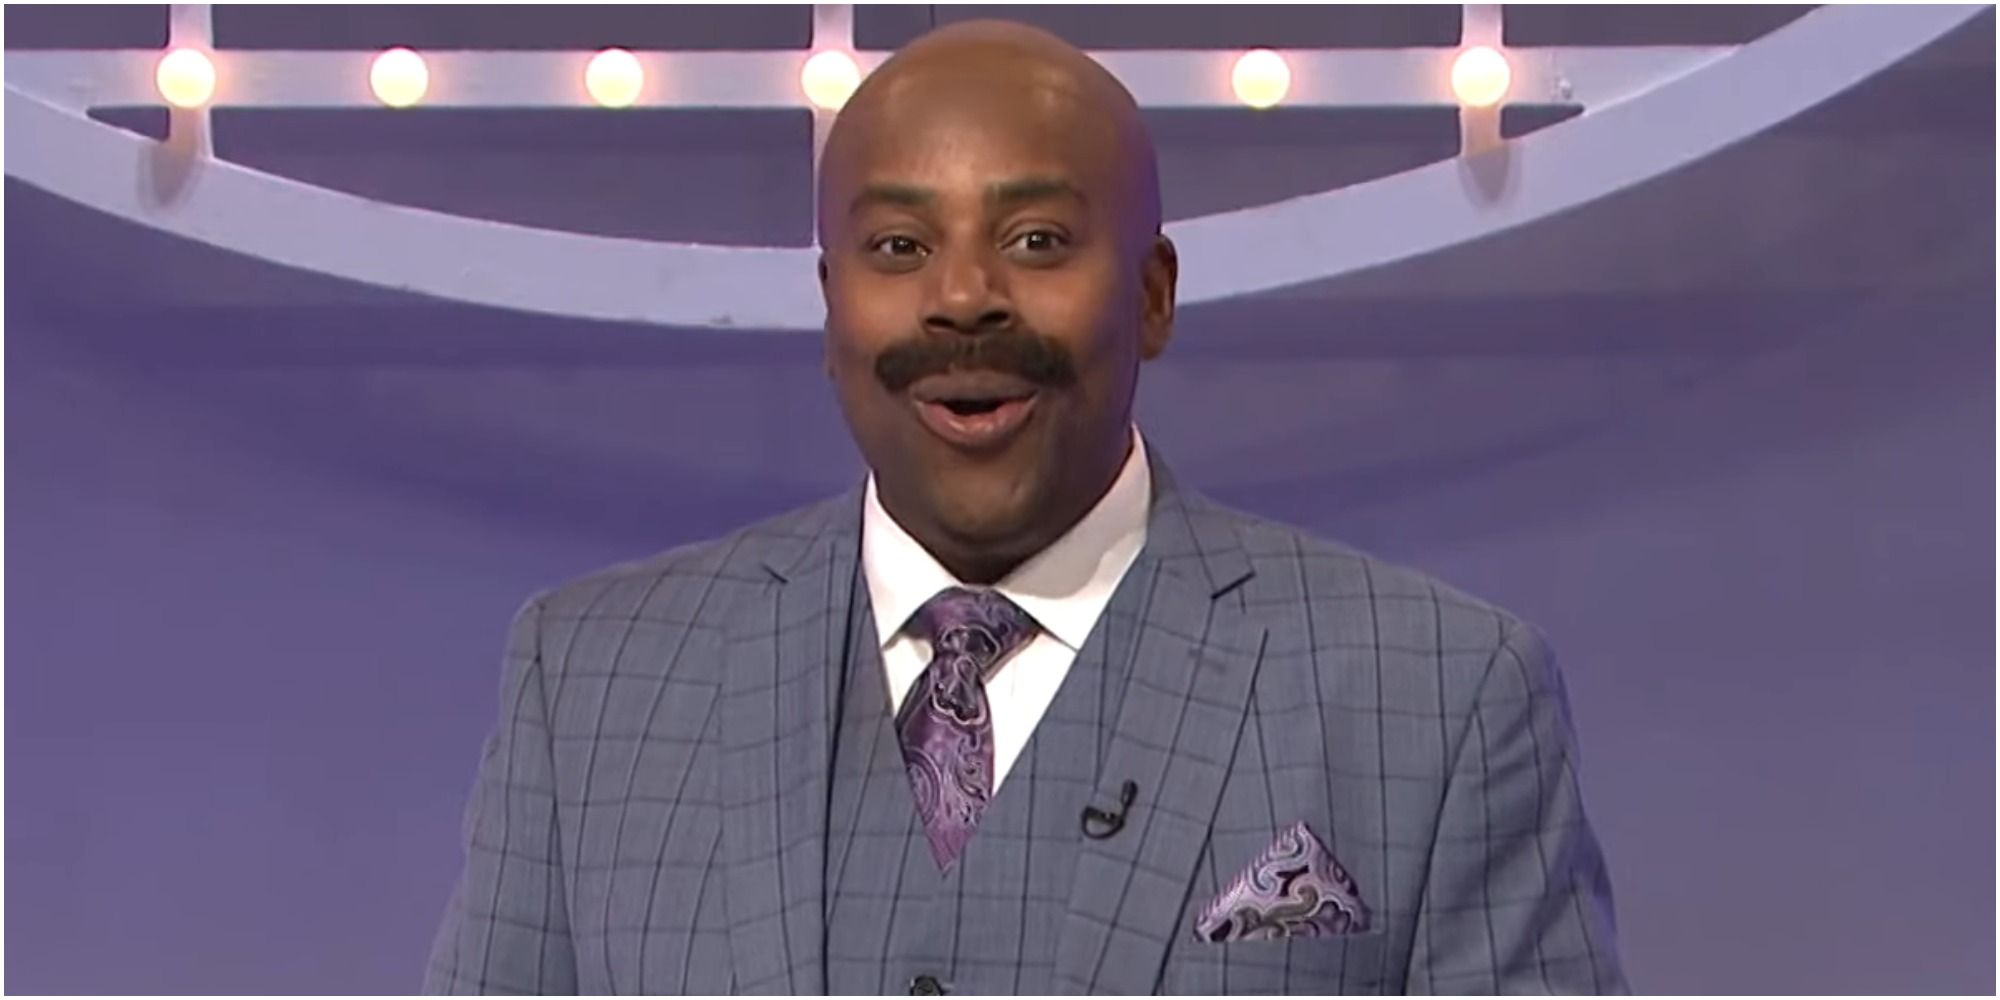 A screenshot of Kenan Thompson as Steve Harvey in the &quot;Family Feud&quot; sketch from SNL